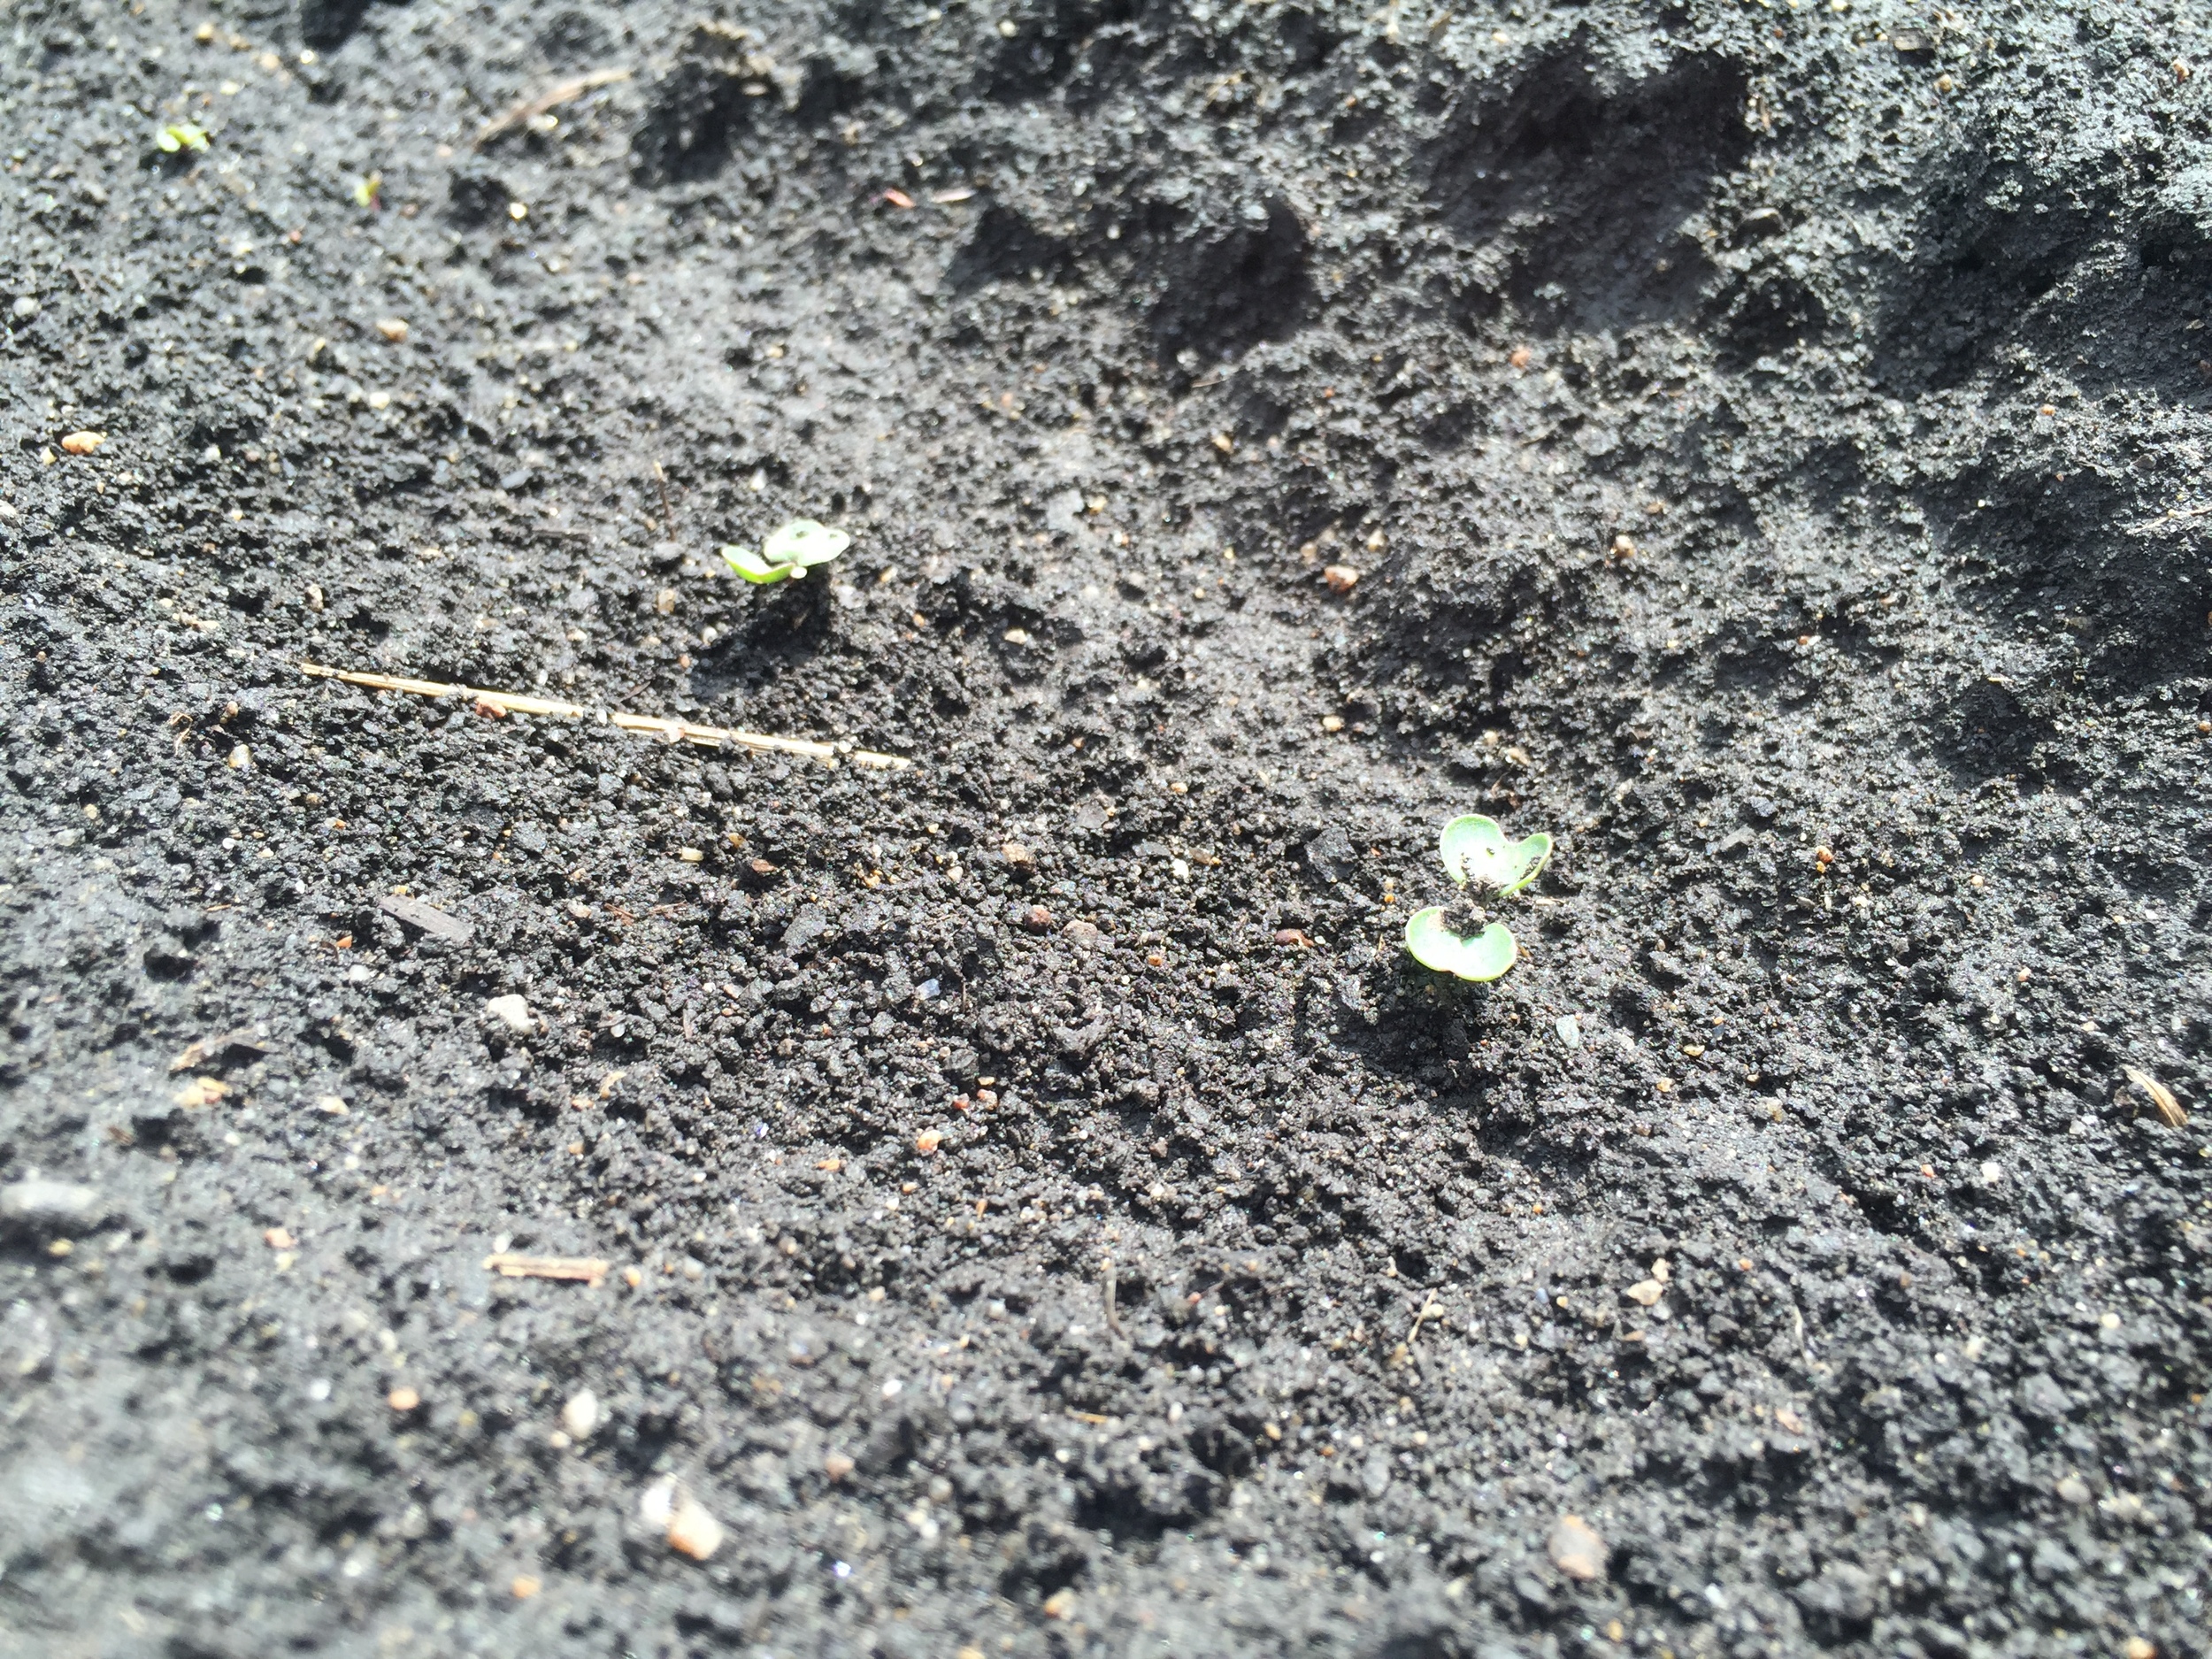  Kale emerging from the ground. 